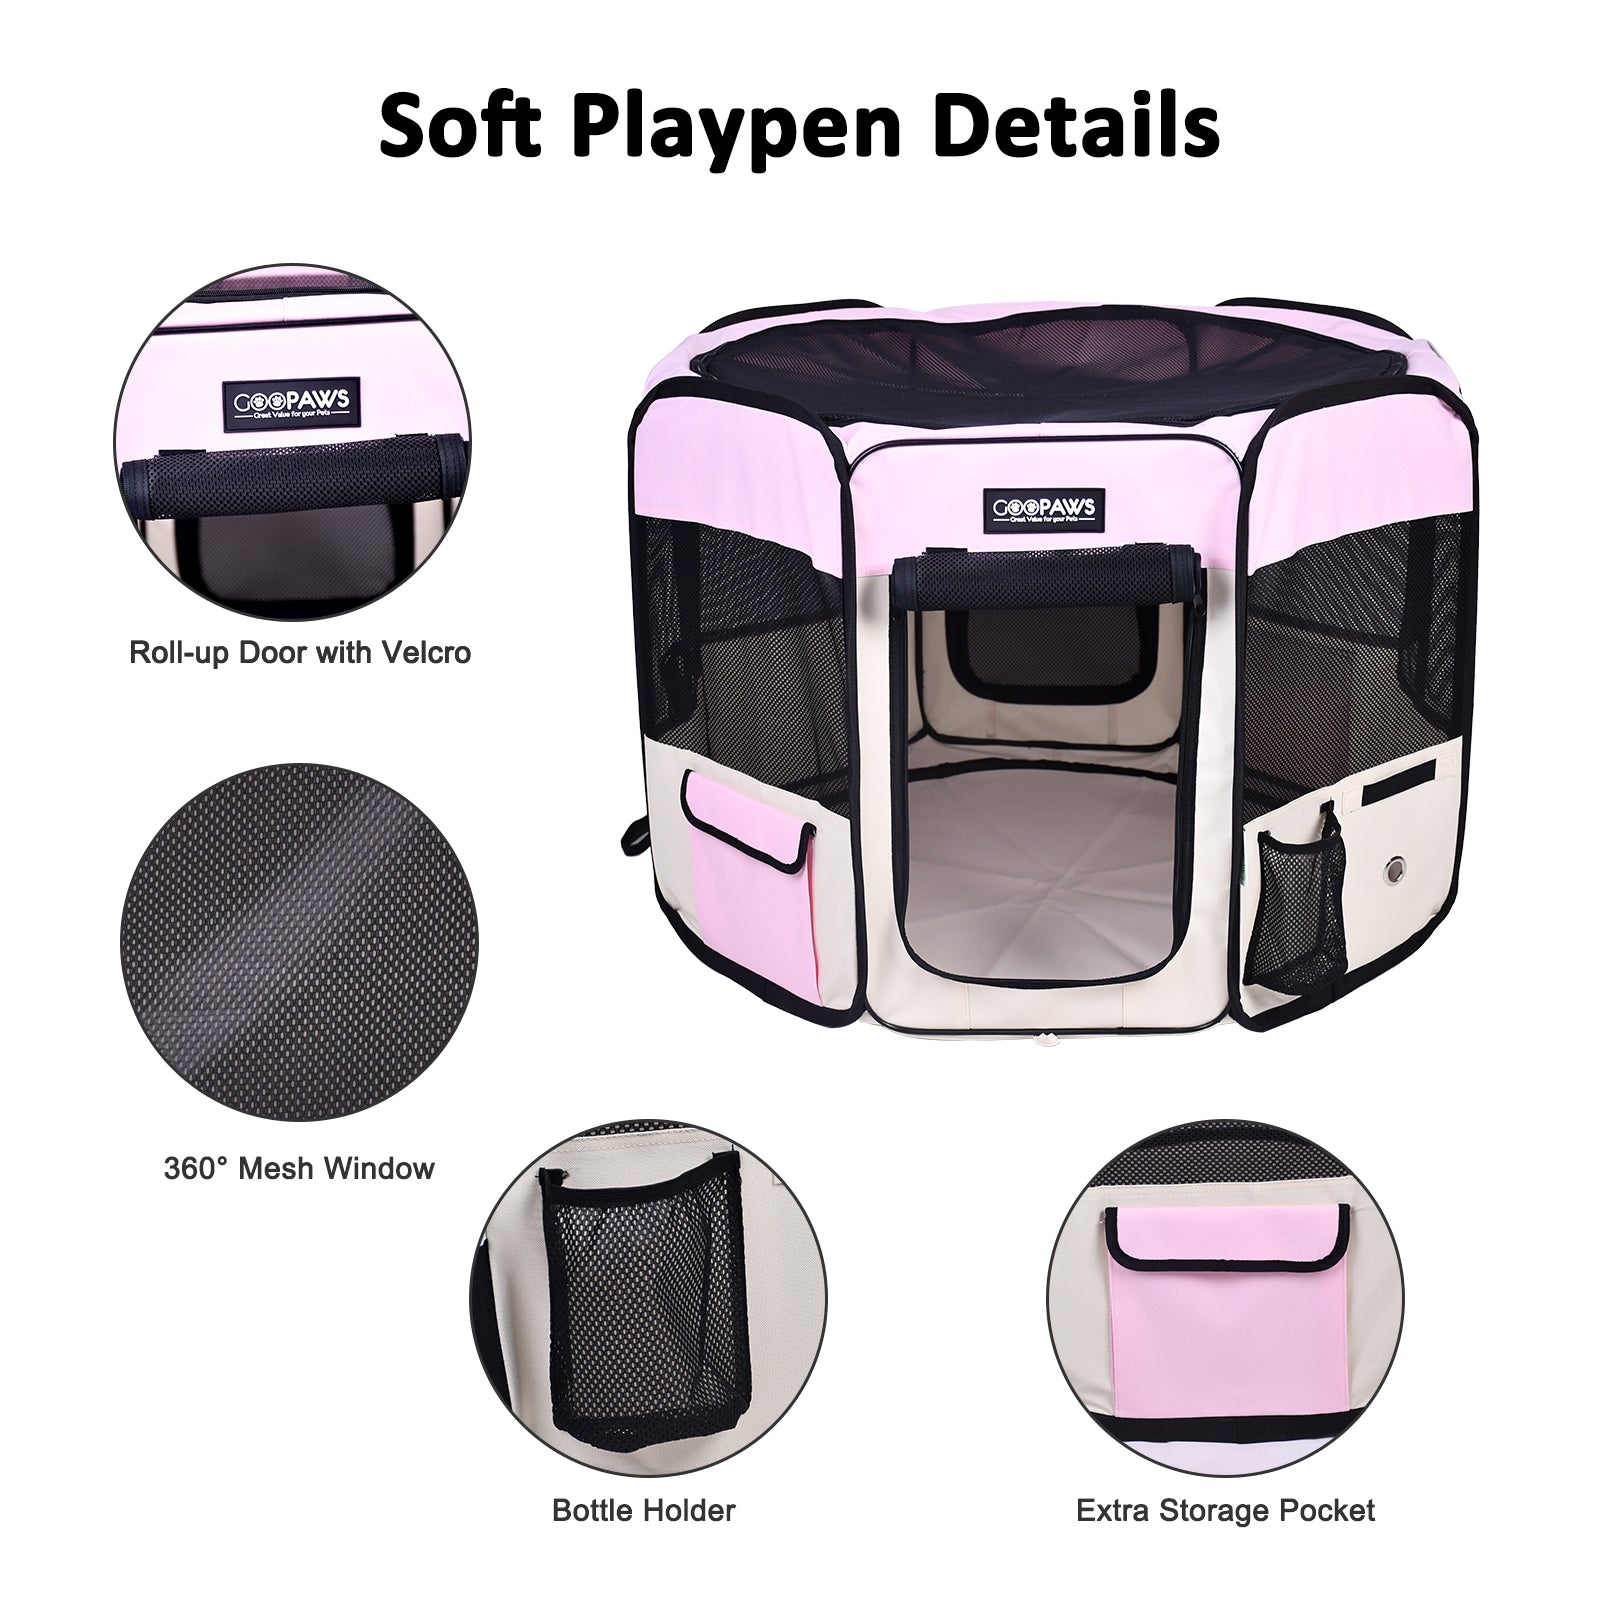 Jespet 2-Door Portable Soft-Sided Dog, Cat & Small Pet Exercise Playpen, Pink,  36''